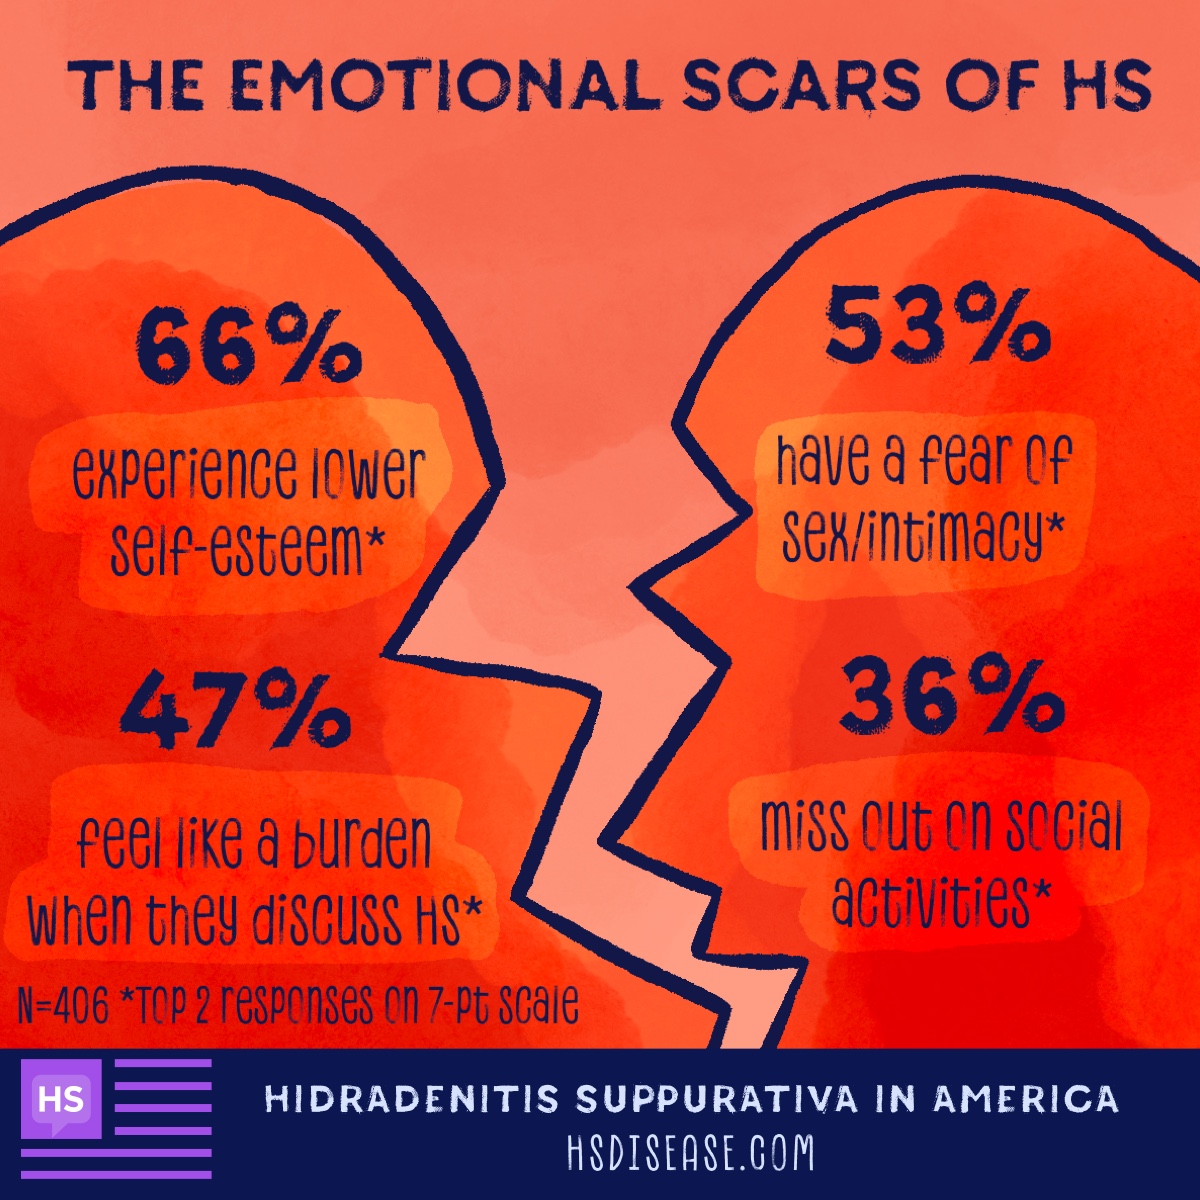 Of those surveyed, 66% experience lower self-esteem, 47% feel like a burden when they discuss HS, 53% have a fear of sex/intimacy, and 36% report missing out on social activities.